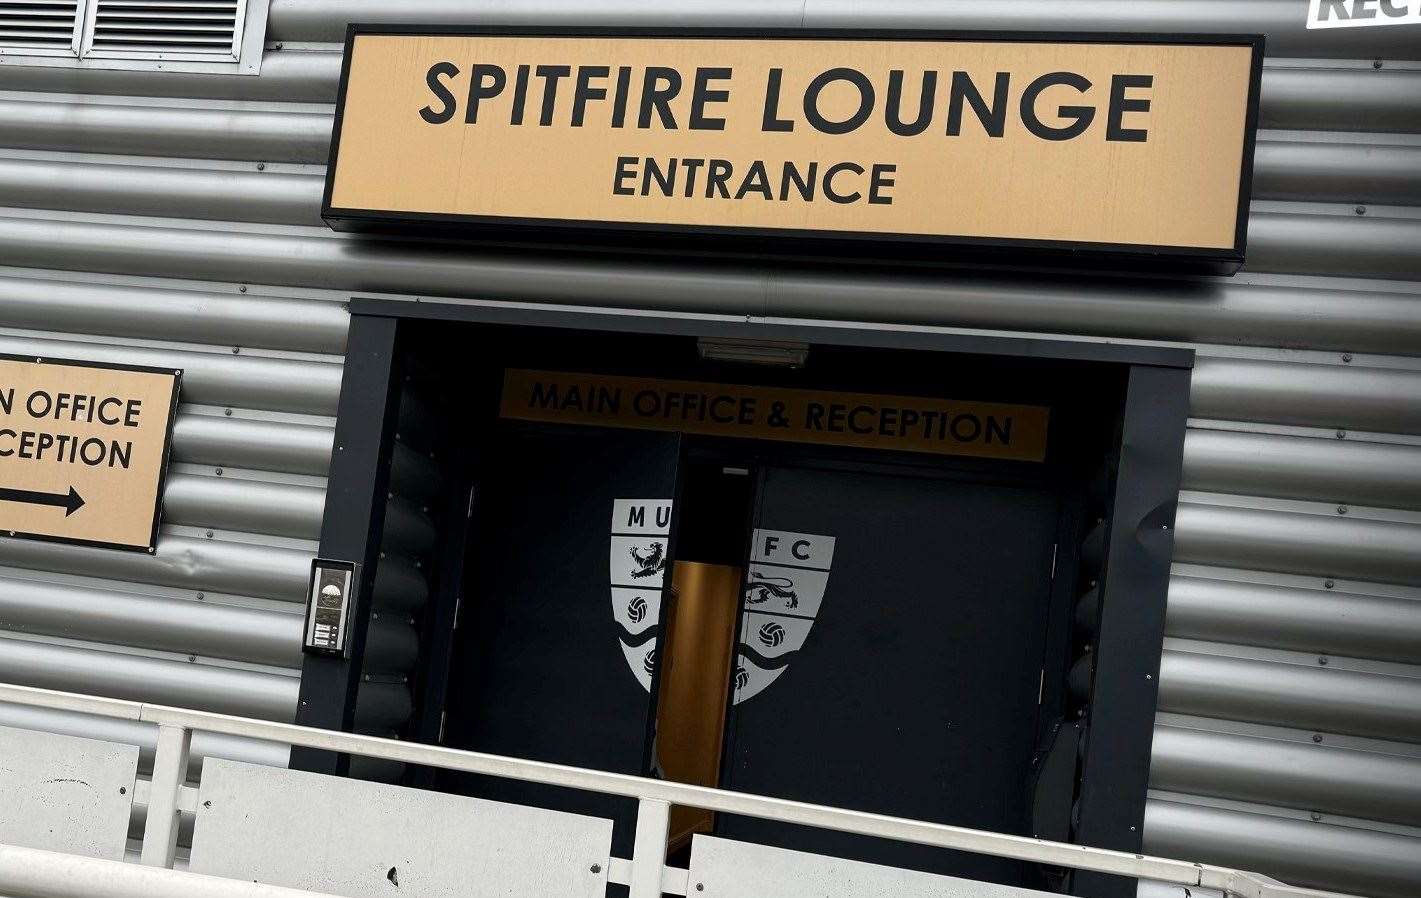 The Coventry City vs. Maidstone United game is being shown at the Spitfire Lounge at the Gallagher Stadium. Picture: Maidstone United